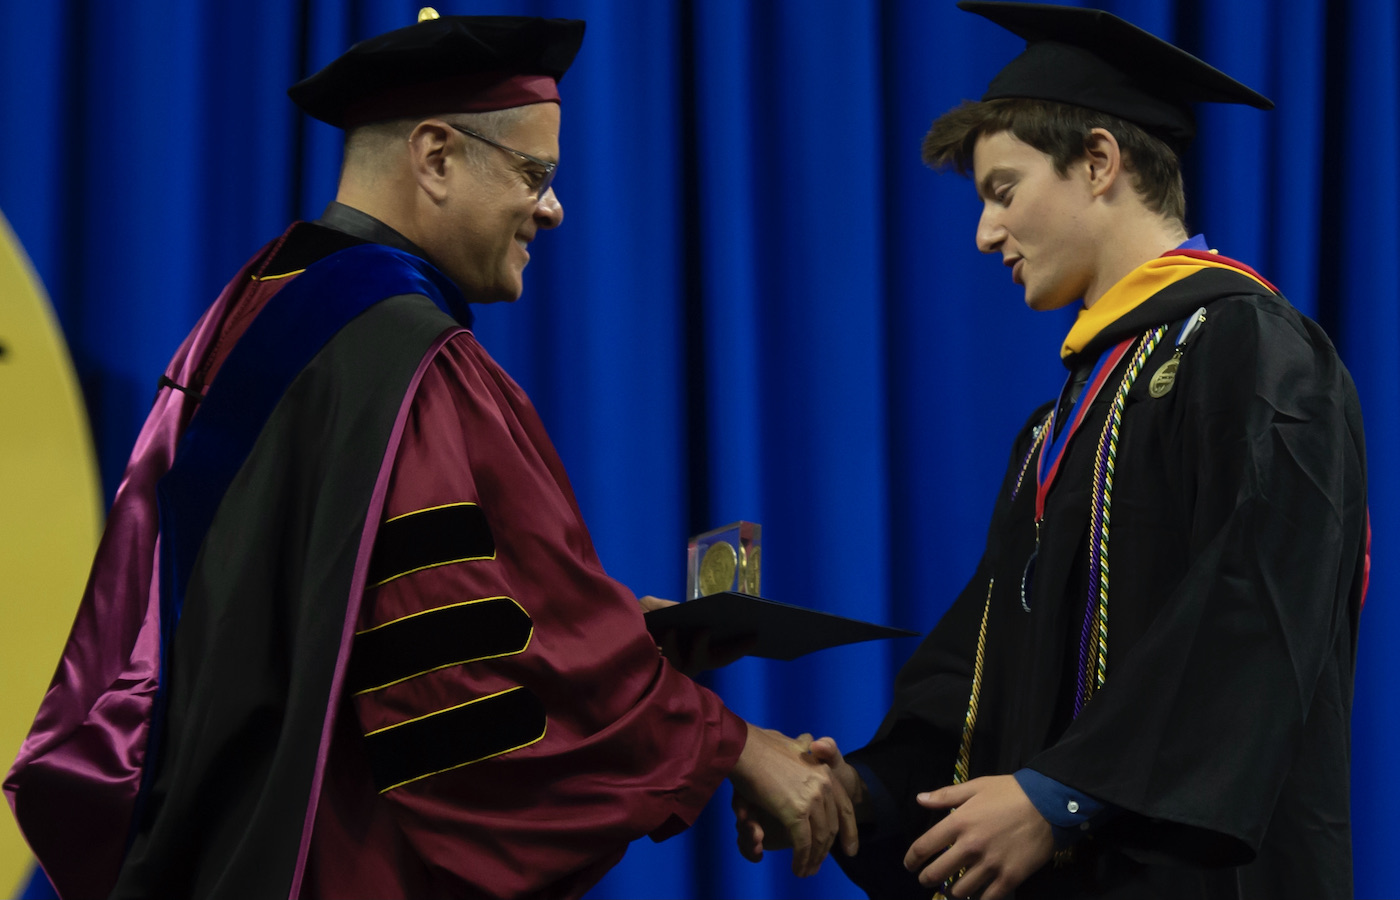 Nolan Beck and Father Kevin Nadolski Shaking Hands at Commencement